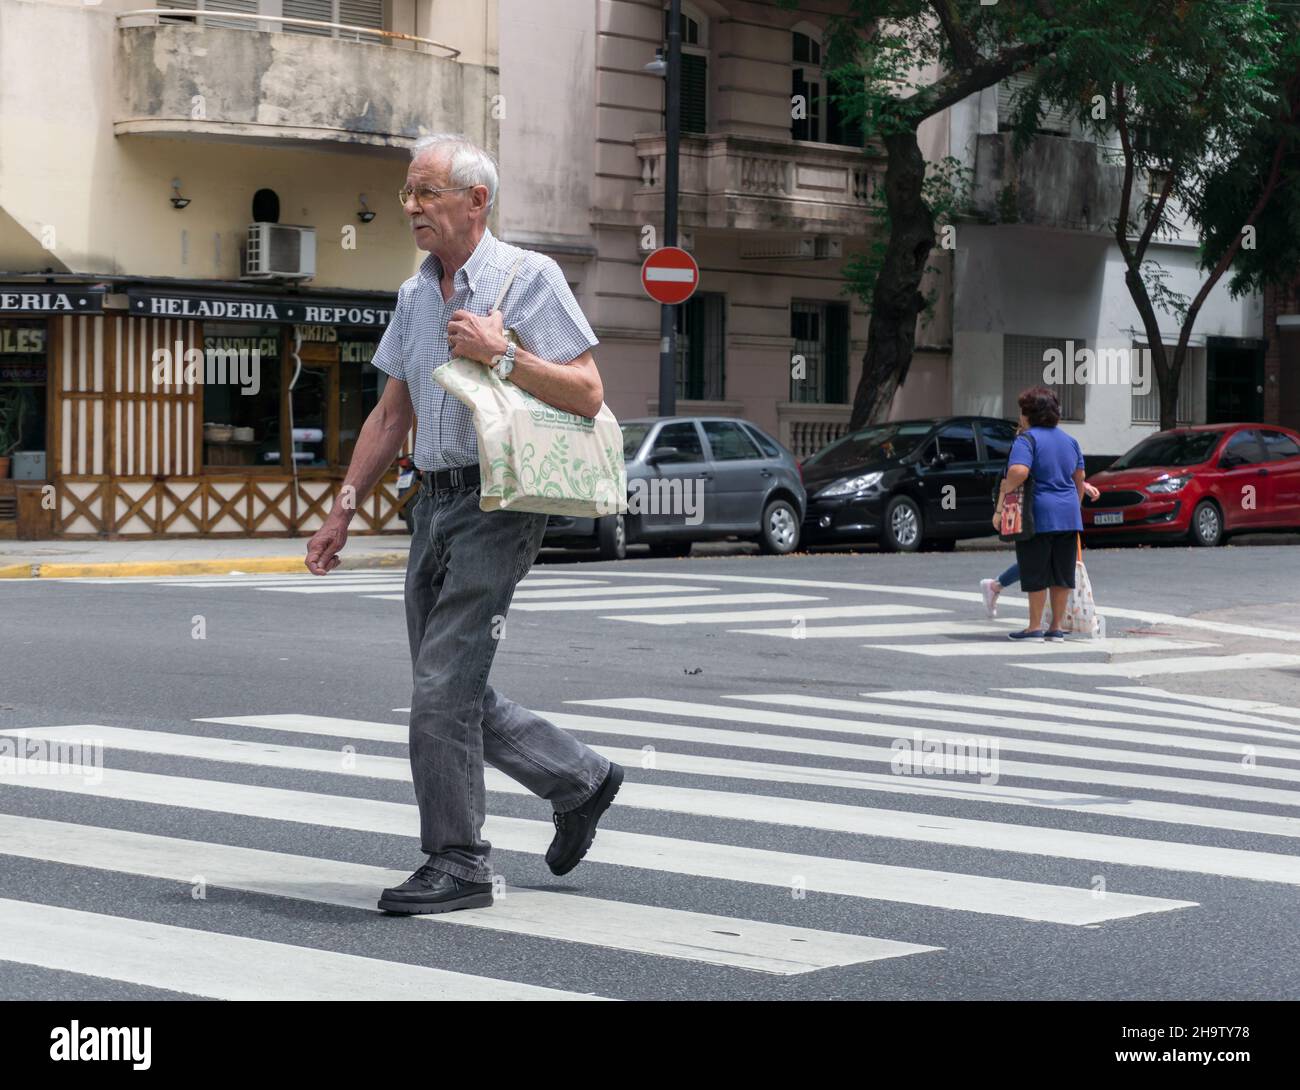 Buenos Aires, Argentina. November 22, 2019: an old man walks the zebra crossing with a shopping bag in Buenos Aires Stock Photo